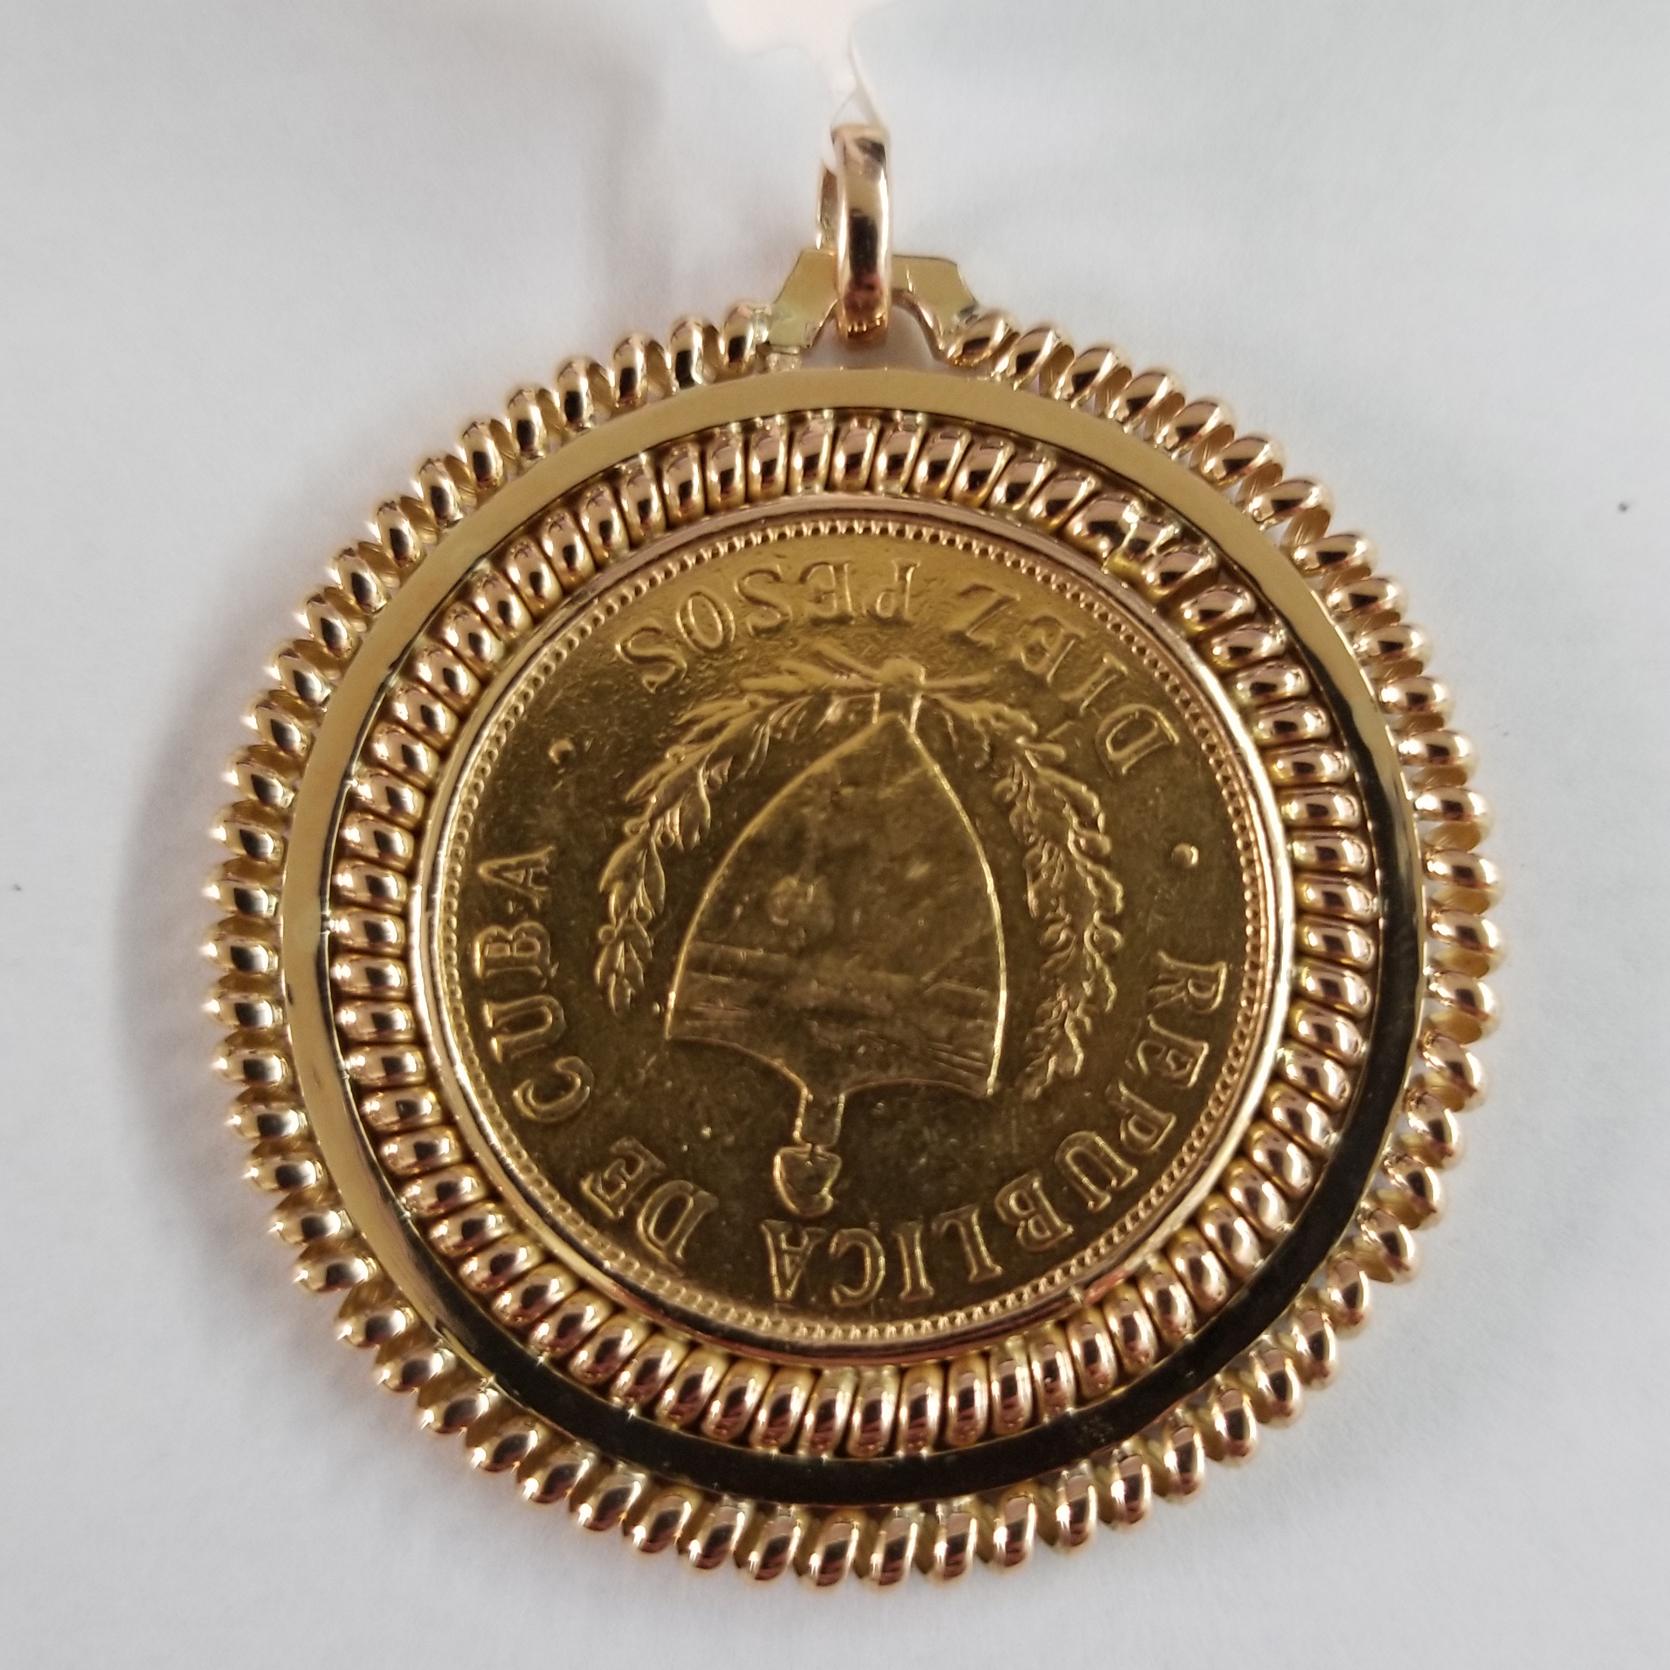 22 Karat Yellow Gold Cuban 10 (Diez) Pesos Coin from 1916 Set in an 18 Karat Yellow Gold Frame with Curl Design on Exterior.  Finished Weight is 28.2 Grams.